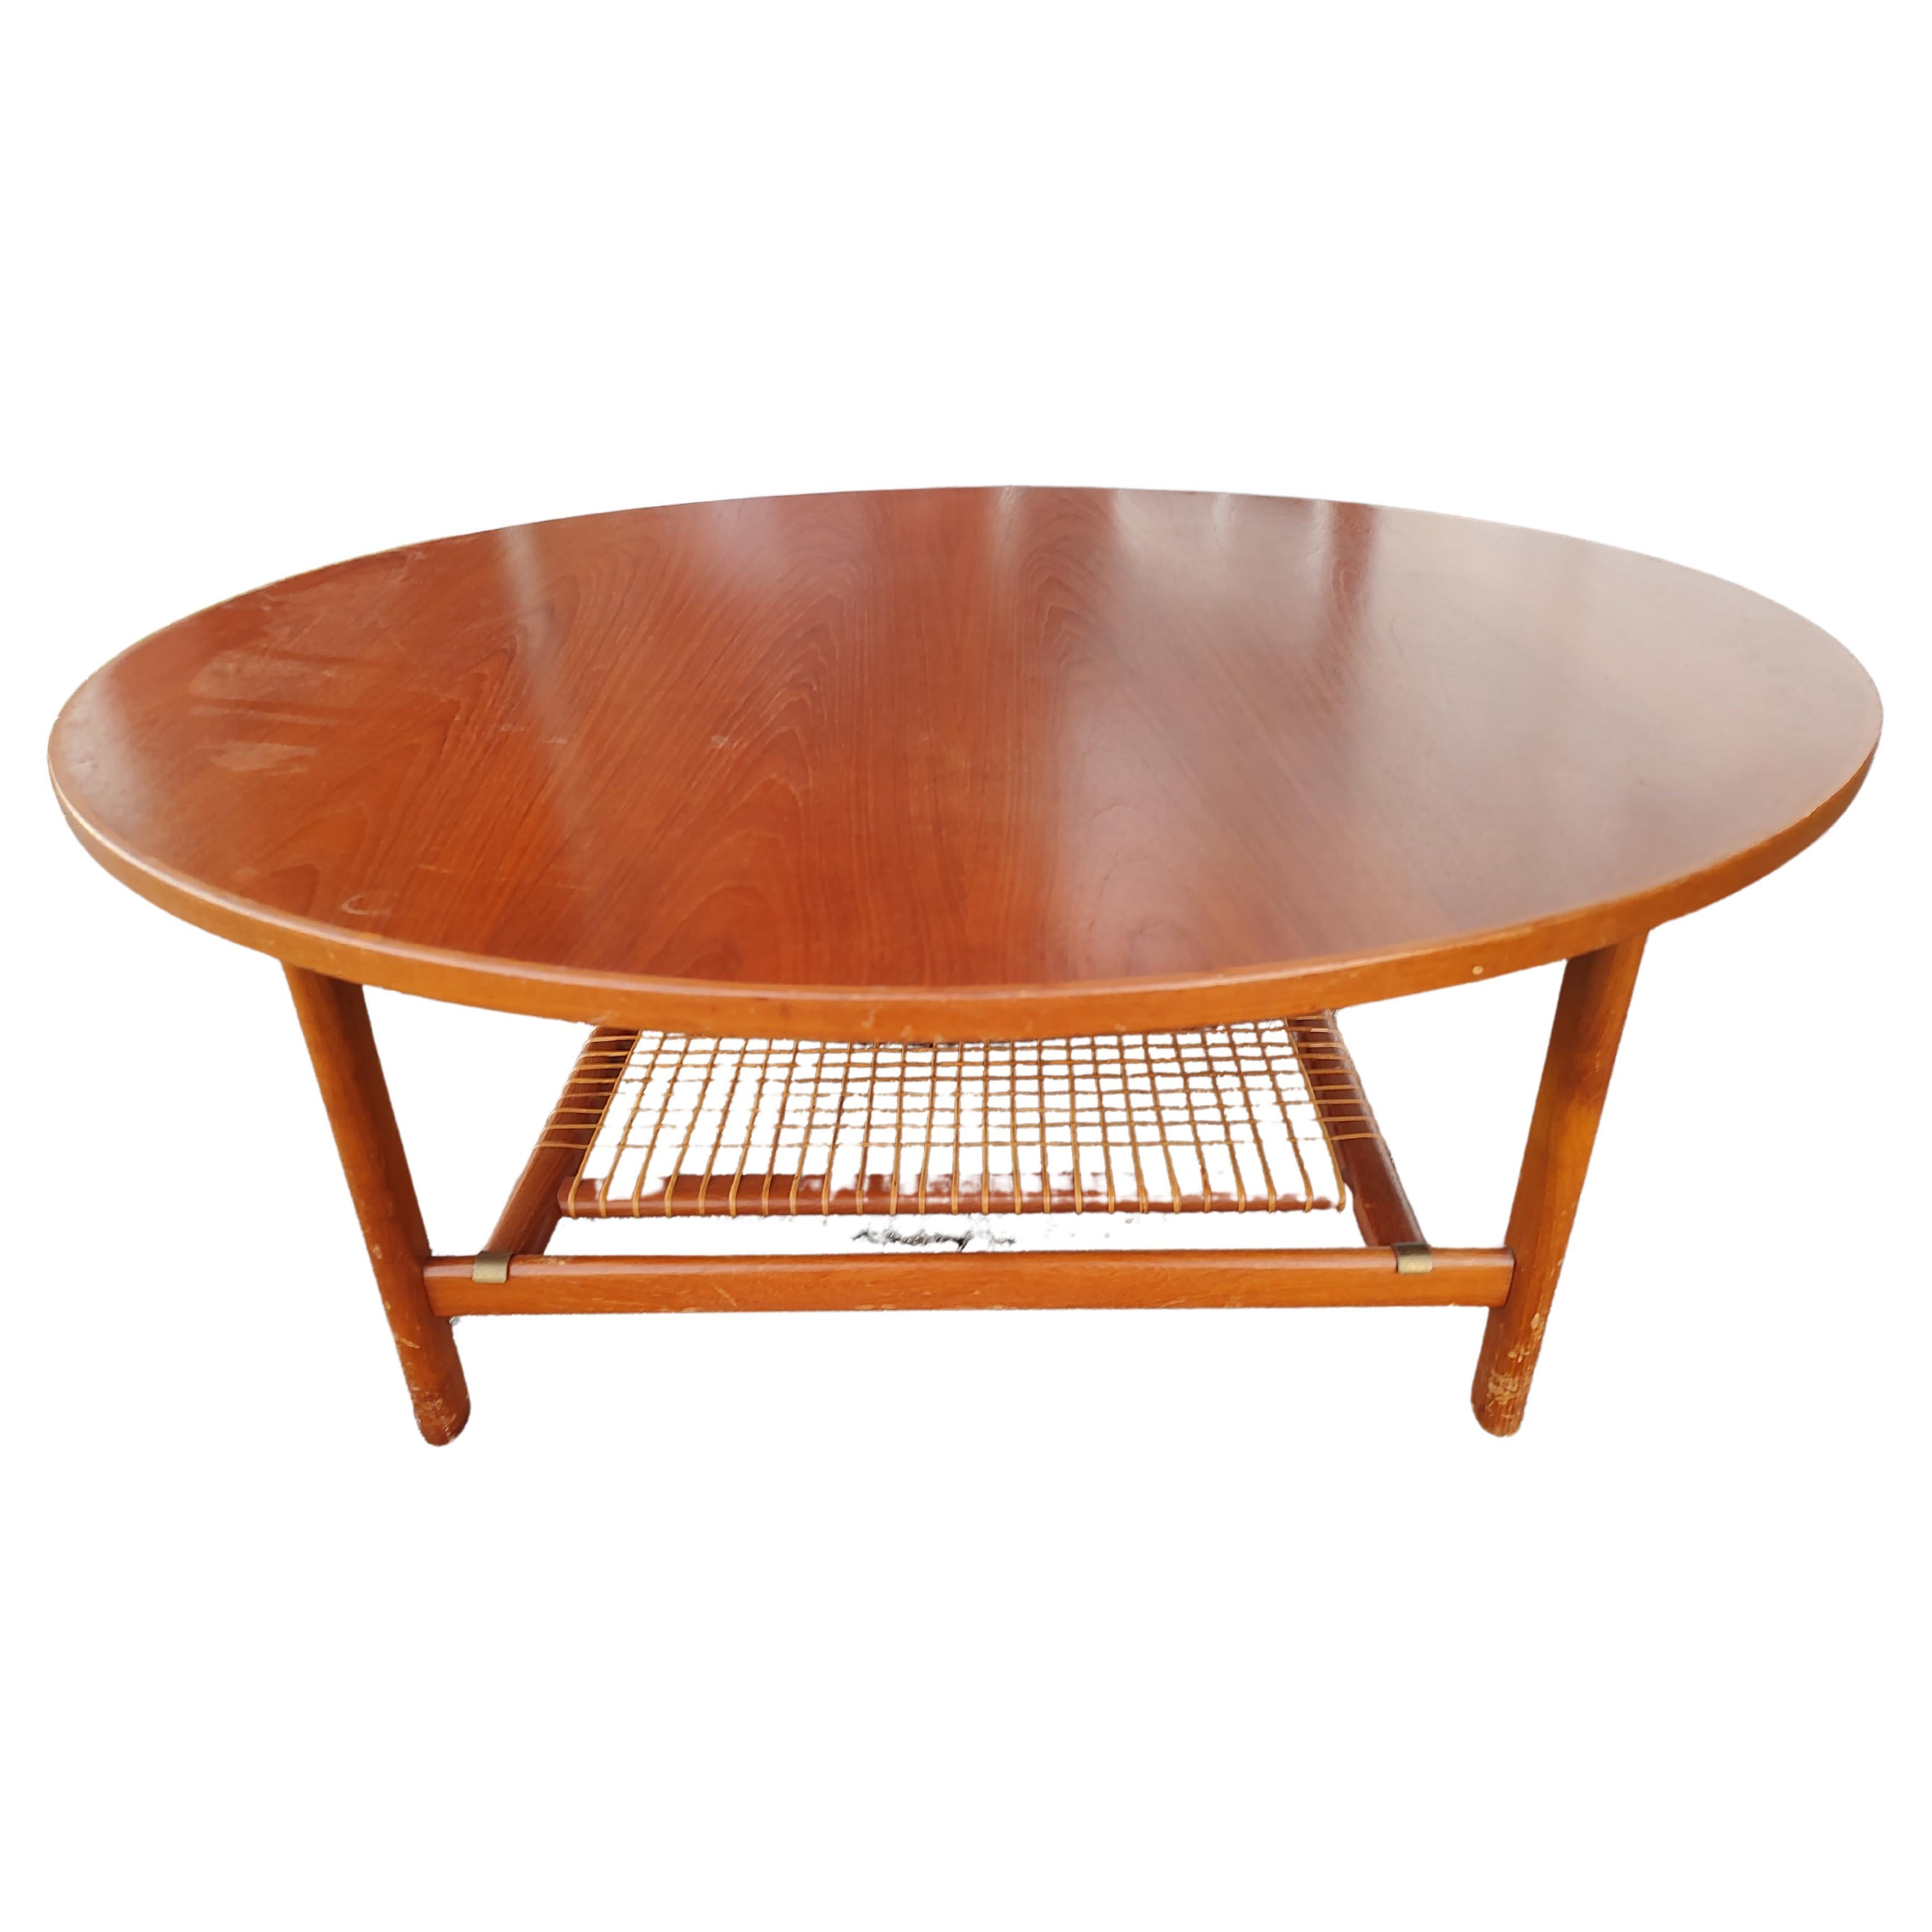 Hand-Crafted Mid-Century Modern Teak with Woven Shelf Cocktail Table by Dux Sweden - Restored For Sale